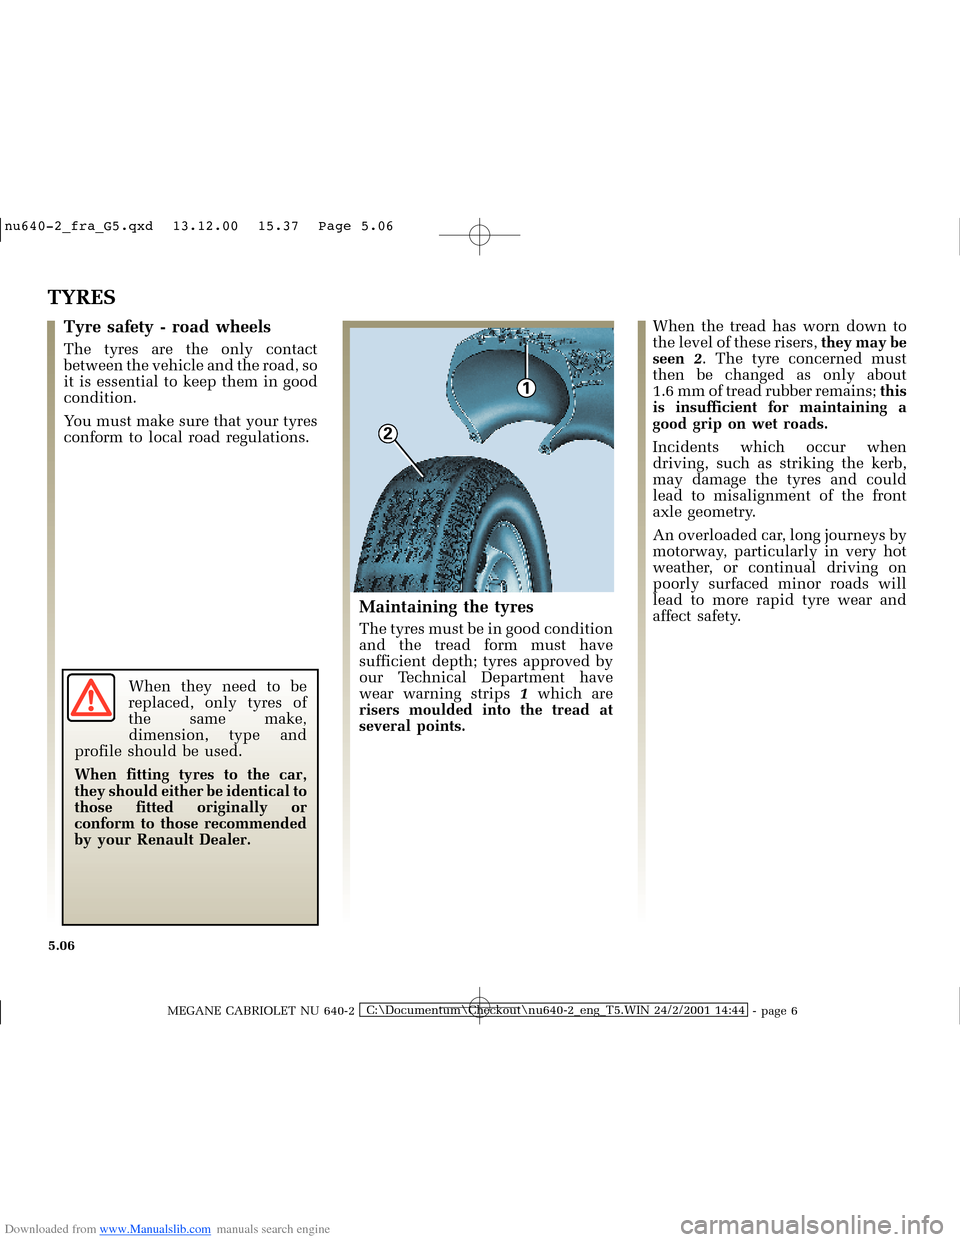 RENAULT MEGANE 2000 X64 / 1.G Owners Manual Downloaded from www.Manualslib.com manuals search engine 1
2
�Q�X������B�I�U�D�B�*���T�[�G� � ��������� � ������ � �3�D�J�H� ����
MEGANE CABRIOLET NU 640-2C:\Documentum\